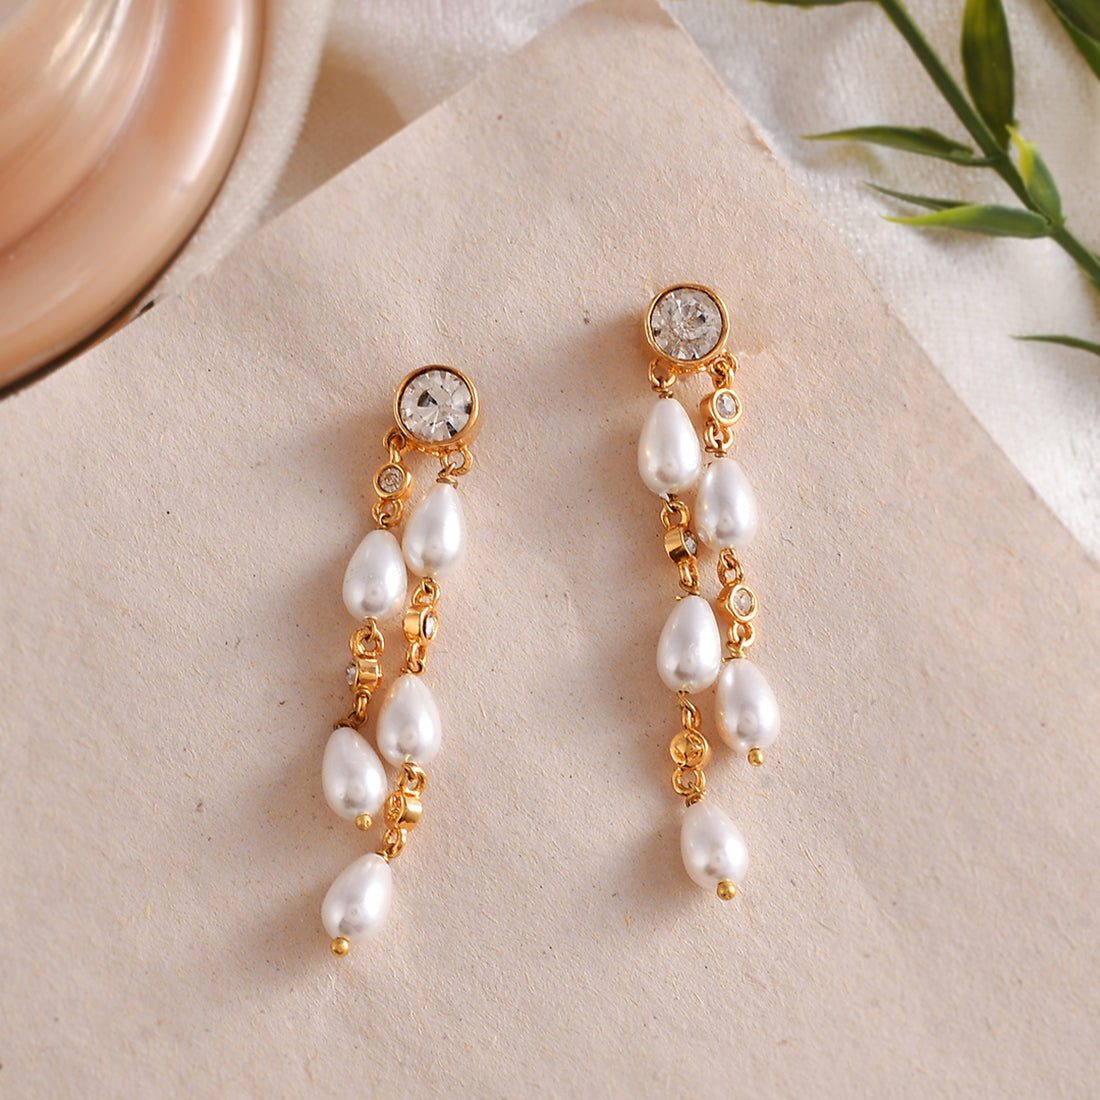 27 Grams Gold Pearl Earring Design  South India Jewels  Pearl earrings  designs Indian jewellery design earrings Gold earrings designs